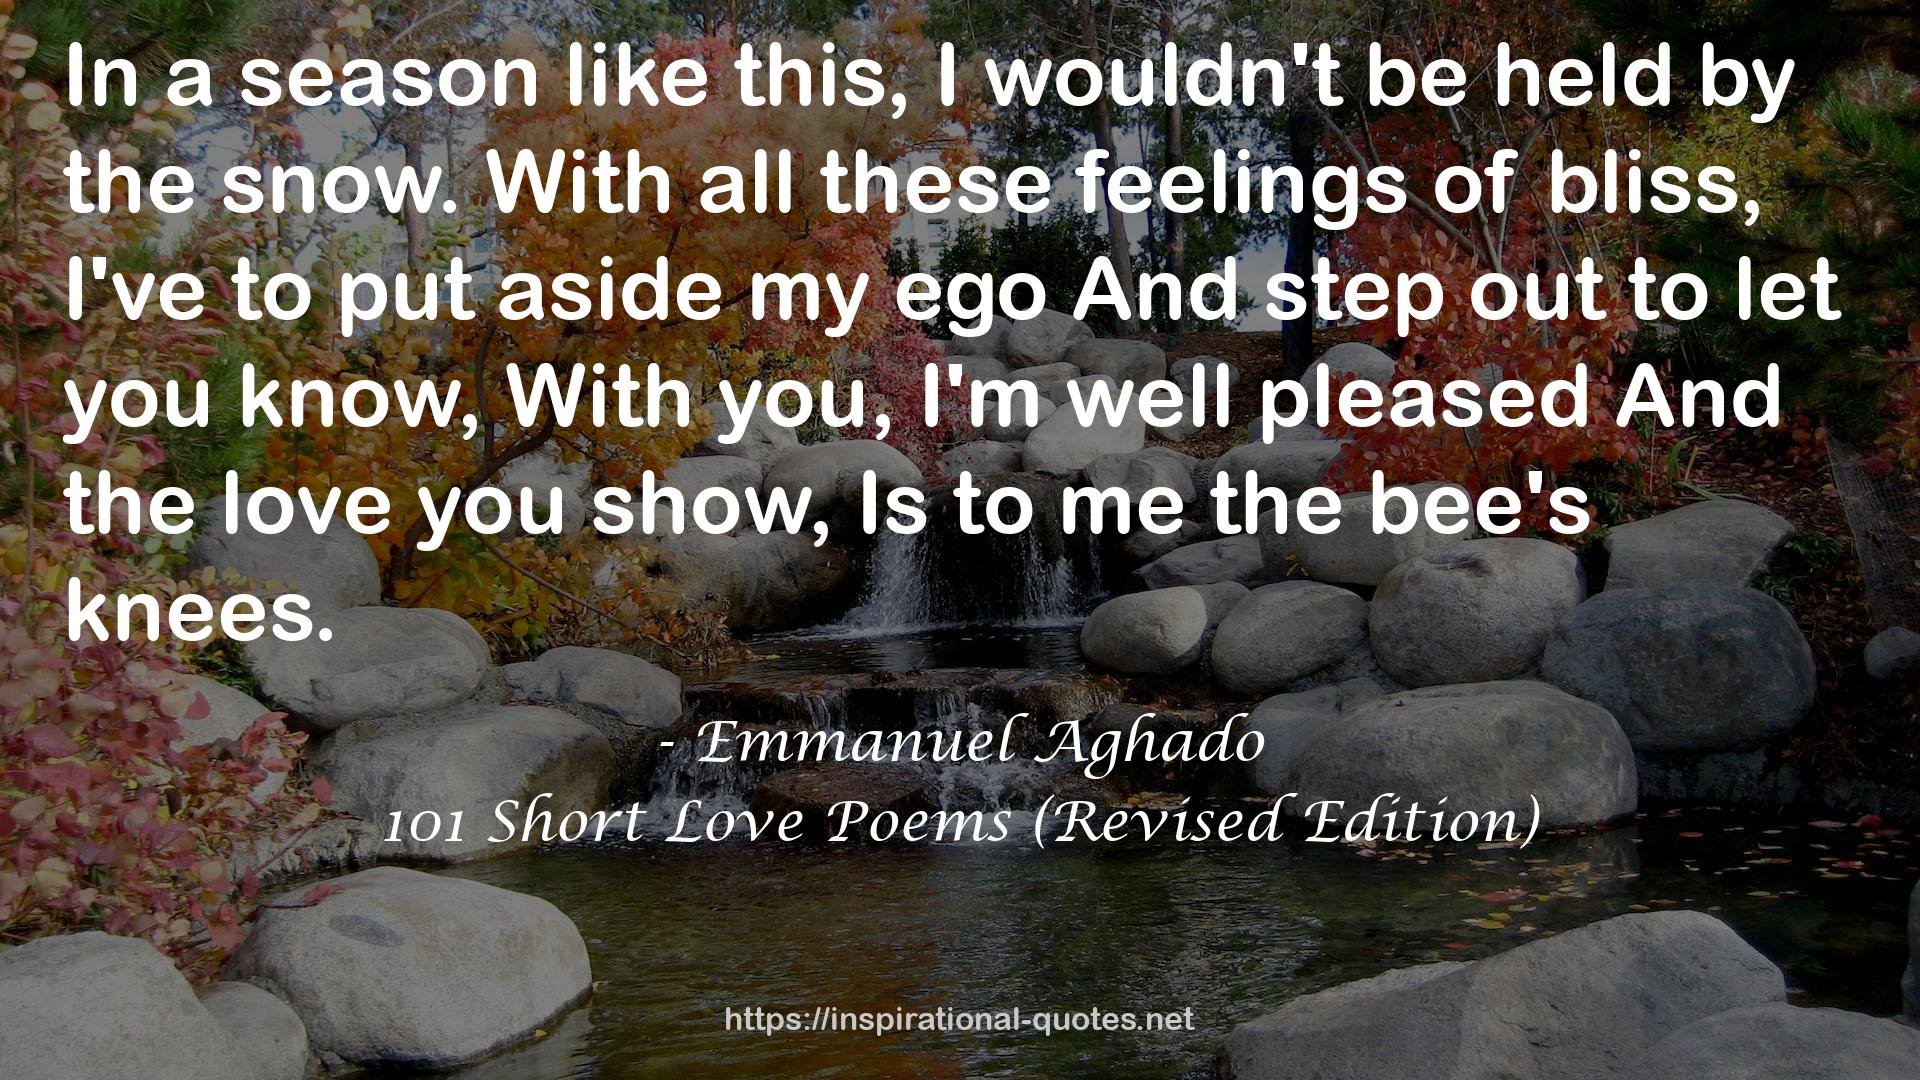 101 Short Love Poems (Revised Edition) QUOTES